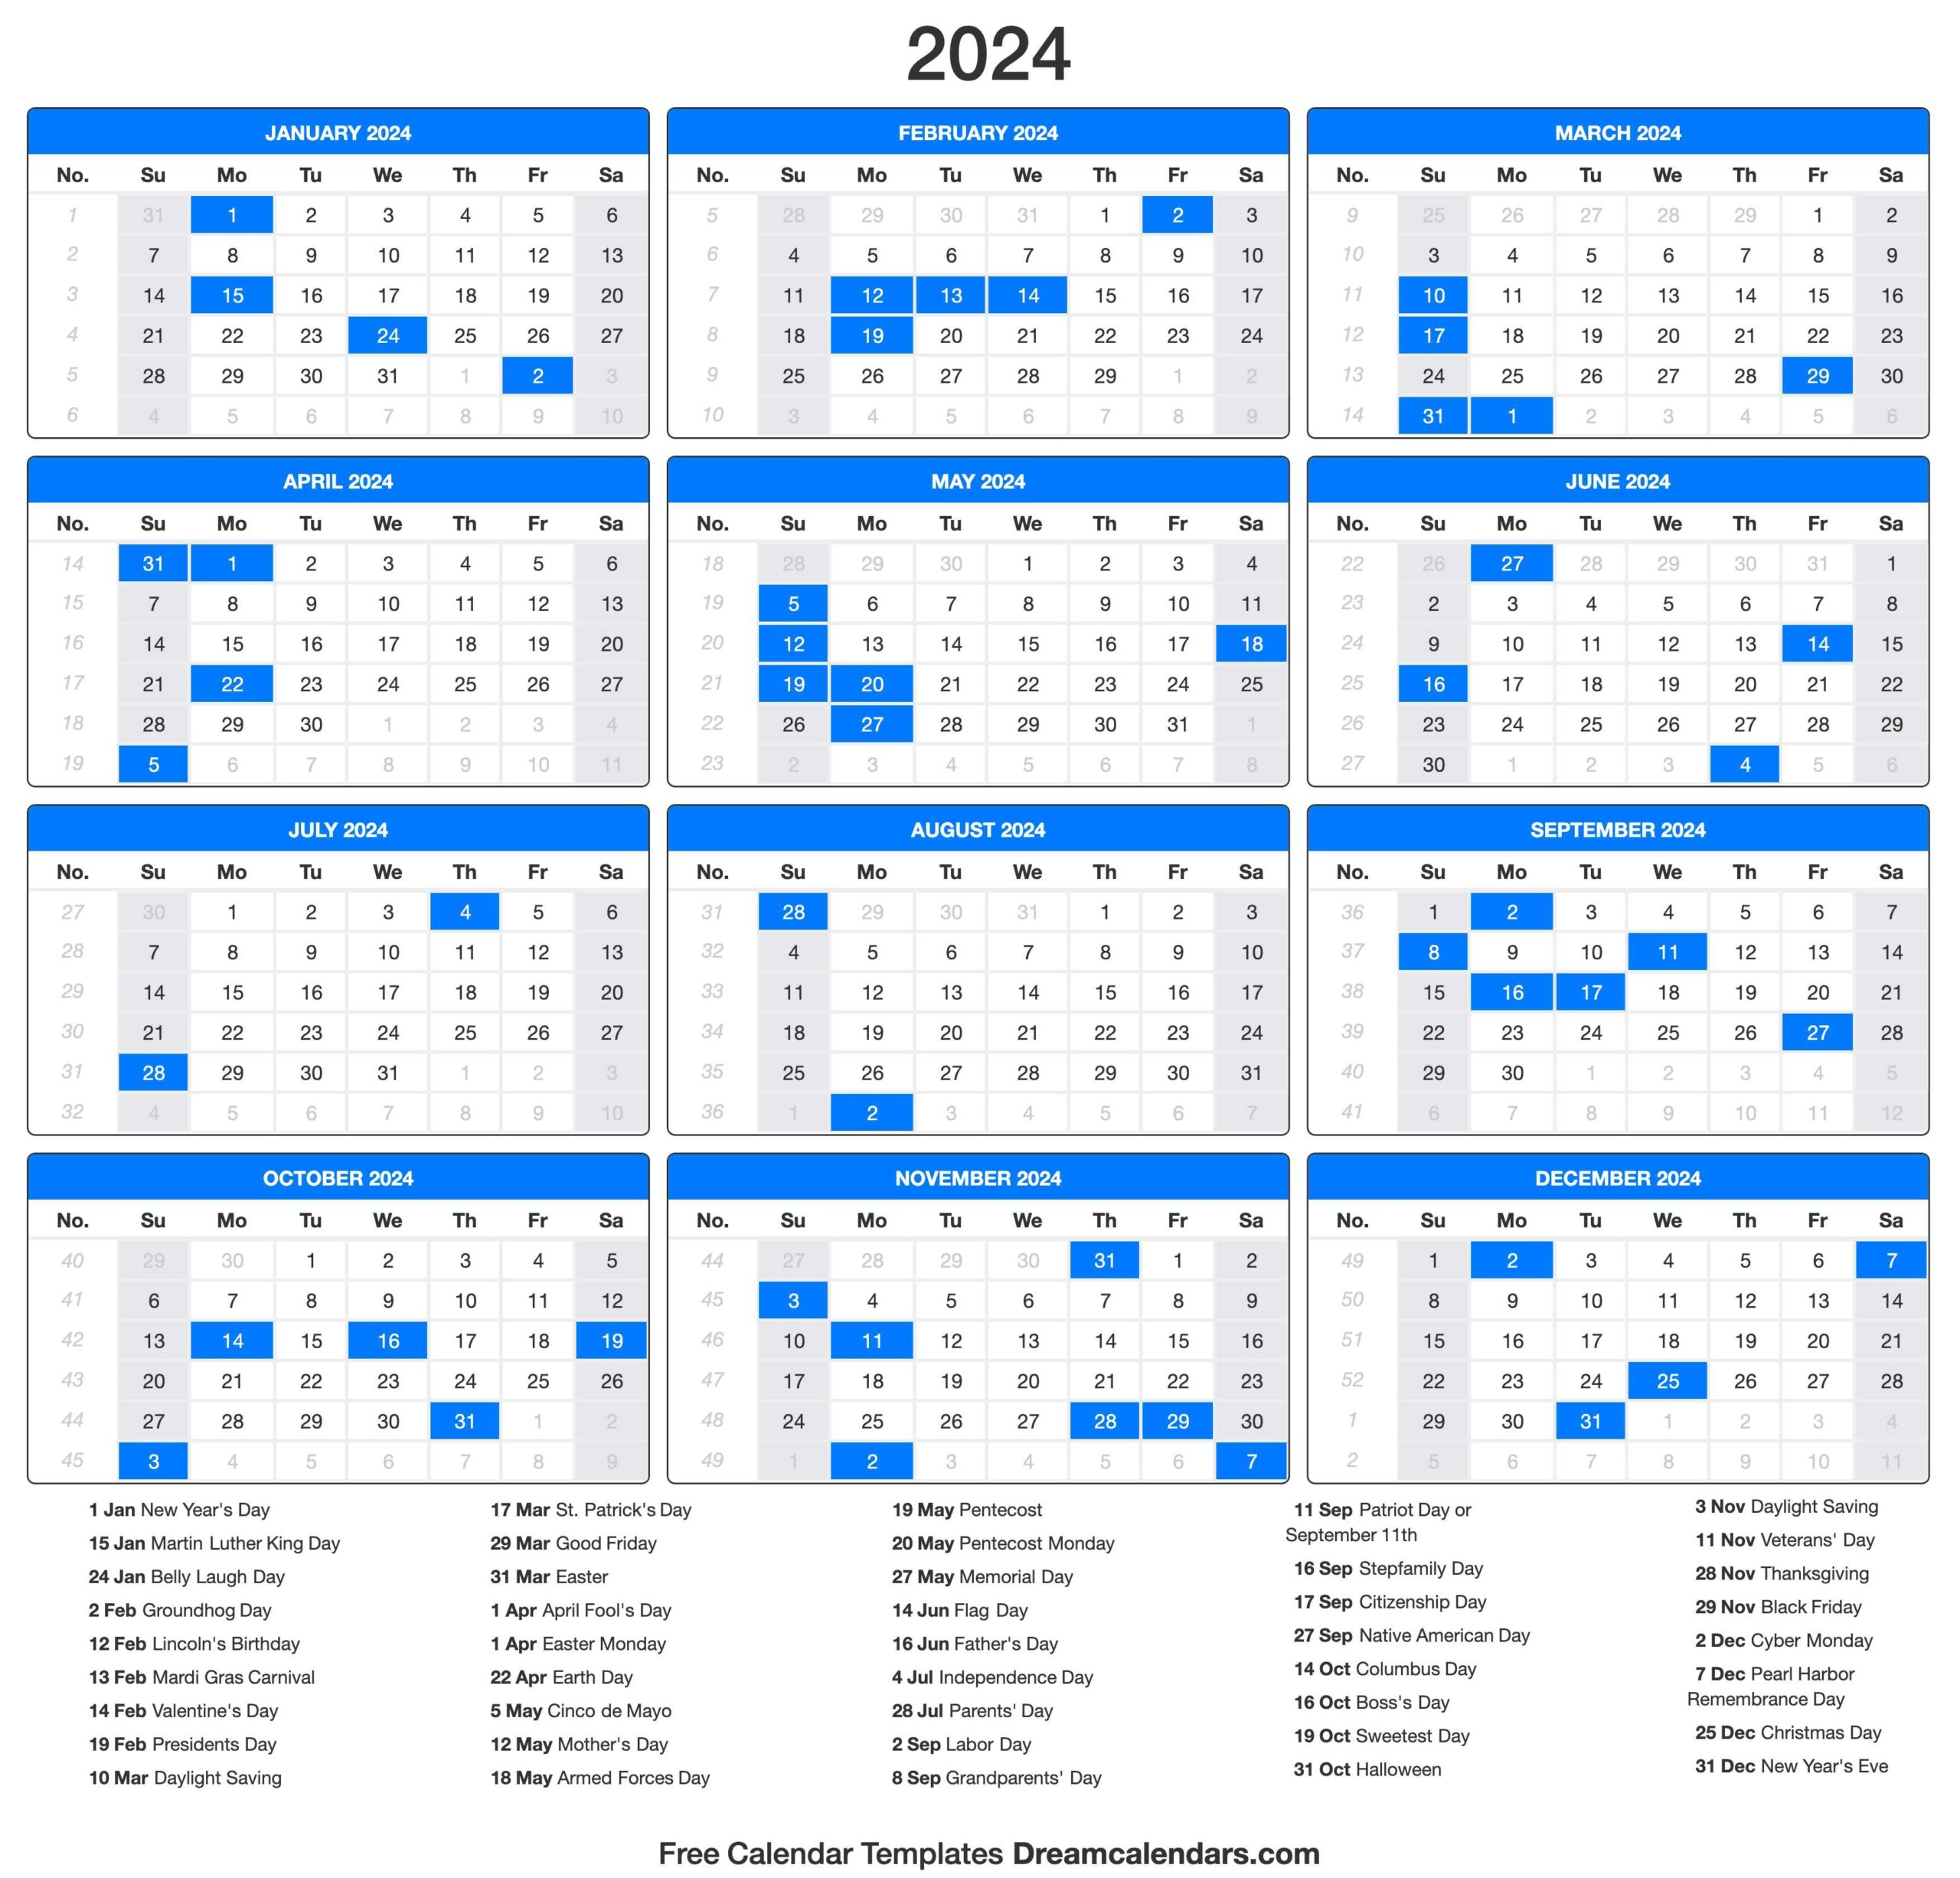 2024 Calendar - Free Printable 2024 Yearly Calendar With Holidays Time And Date